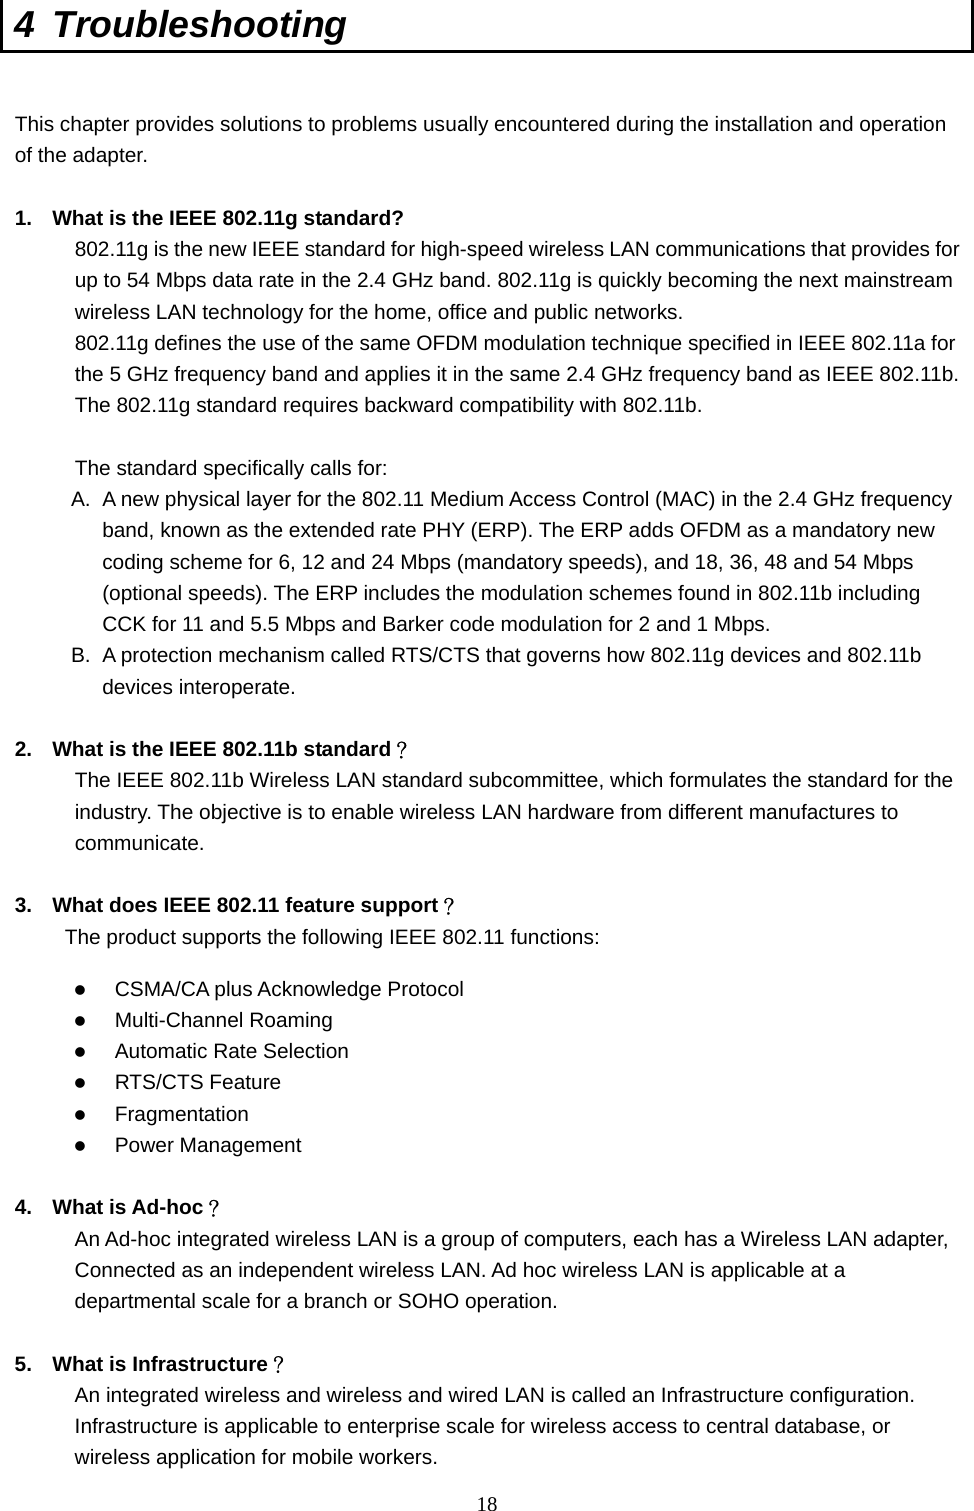  18 4 Troubleshooting  This chapter provides solutions to problems usually encountered during the installation and operation of the adapter.    1.  What is the IEEE 802.11g standard? 802.11g is the new IEEE standard for high-speed wireless LAN communications that provides for up to 54 Mbps data rate in the 2.4 GHz band. 802.11g is quickly becoming the next mainstream wireless LAN technology for the home, office and public networks.   802.11g defines the use of the same OFDM modulation technique specified in IEEE 802.11a for the 5 GHz frequency band and applies it in the same 2.4 GHz frequency band as IEEE 802.11b. The 802.11g standard requires backward compatibility with 802.11b.  The standard specifically calls for:   A.  A new physical layer for the 802.11 Medium Access Control (MAC) in the 2.4 GHz frequency band, known as the extended rate PHY (ERP). The ERP adds OFDM as a mandatory new coding scheme for 6, 12 and 24 Mbps (mandatory speeds), and 18, 36, 48 and 54 Mbps (optional speeds). The ERP includes the modulation schemes found in 802.11b including CCK for 11 and 5.5 Mbps and Barker code modulation for 2 and 1 Mbps. B.  A protection mechanism called RTS/CTS that governs how 802.11g devices and 802.11b devices interoperate.  2.  What is the IEEE 802.11b standard？ The IEEE 802.11b Wireless LAN standard subcommittee, which formulates the standard for the industry. The objective is to enable wireless LAN hardware from different manufactures to communicate.  3.  What does IEEE 802.11 feature support？ The product supports the following IEEE 802.11 functions:   CSMA/CA plus Acknowledge Protocol   Multi-Channel Roaming   Automatic Rate Selection   RTS/CTS Feature   Fragmentation   Power Management  4. What is Ad-hoc？ An Ad-hoc integrated wireless LAN is a group of computers, each has a Wireless LAN adapter, Connected as an independent wireless LAN. Ad hoc wireless LAN is applicable at a departmental scale for a branch or SOHO operation.  5.  What is Infrastructure？ An integrated wireless and wireless and wired LAN is called an Infrastructure configuration. Infrastructure is applicable to enterprise scale for wireless access to central database, or wireless application for mobile workers. 